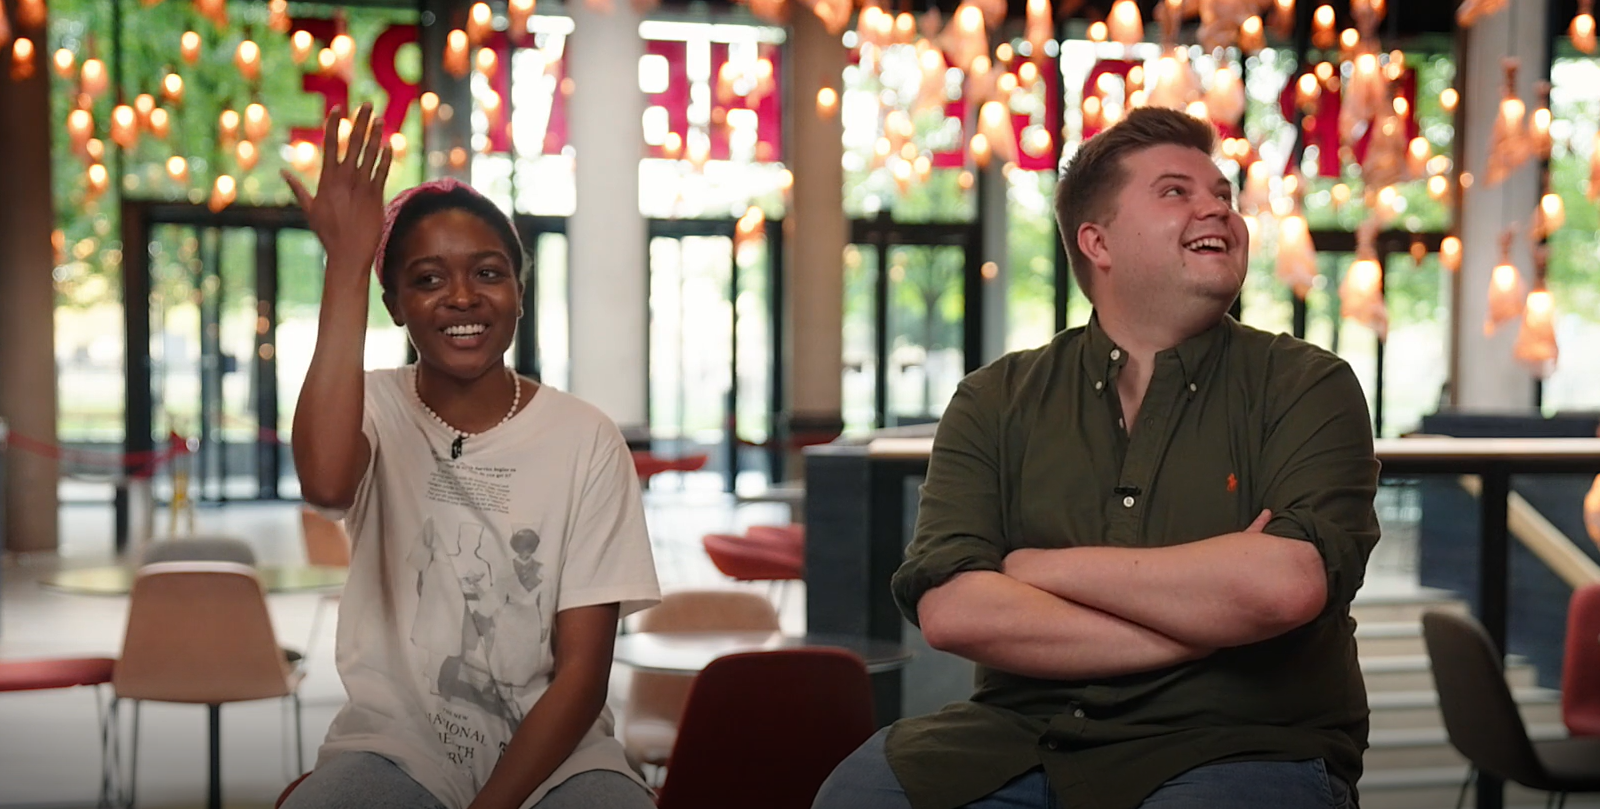 Samuel Creasey and Ella Dacres share their theatre firsts - Click to watch